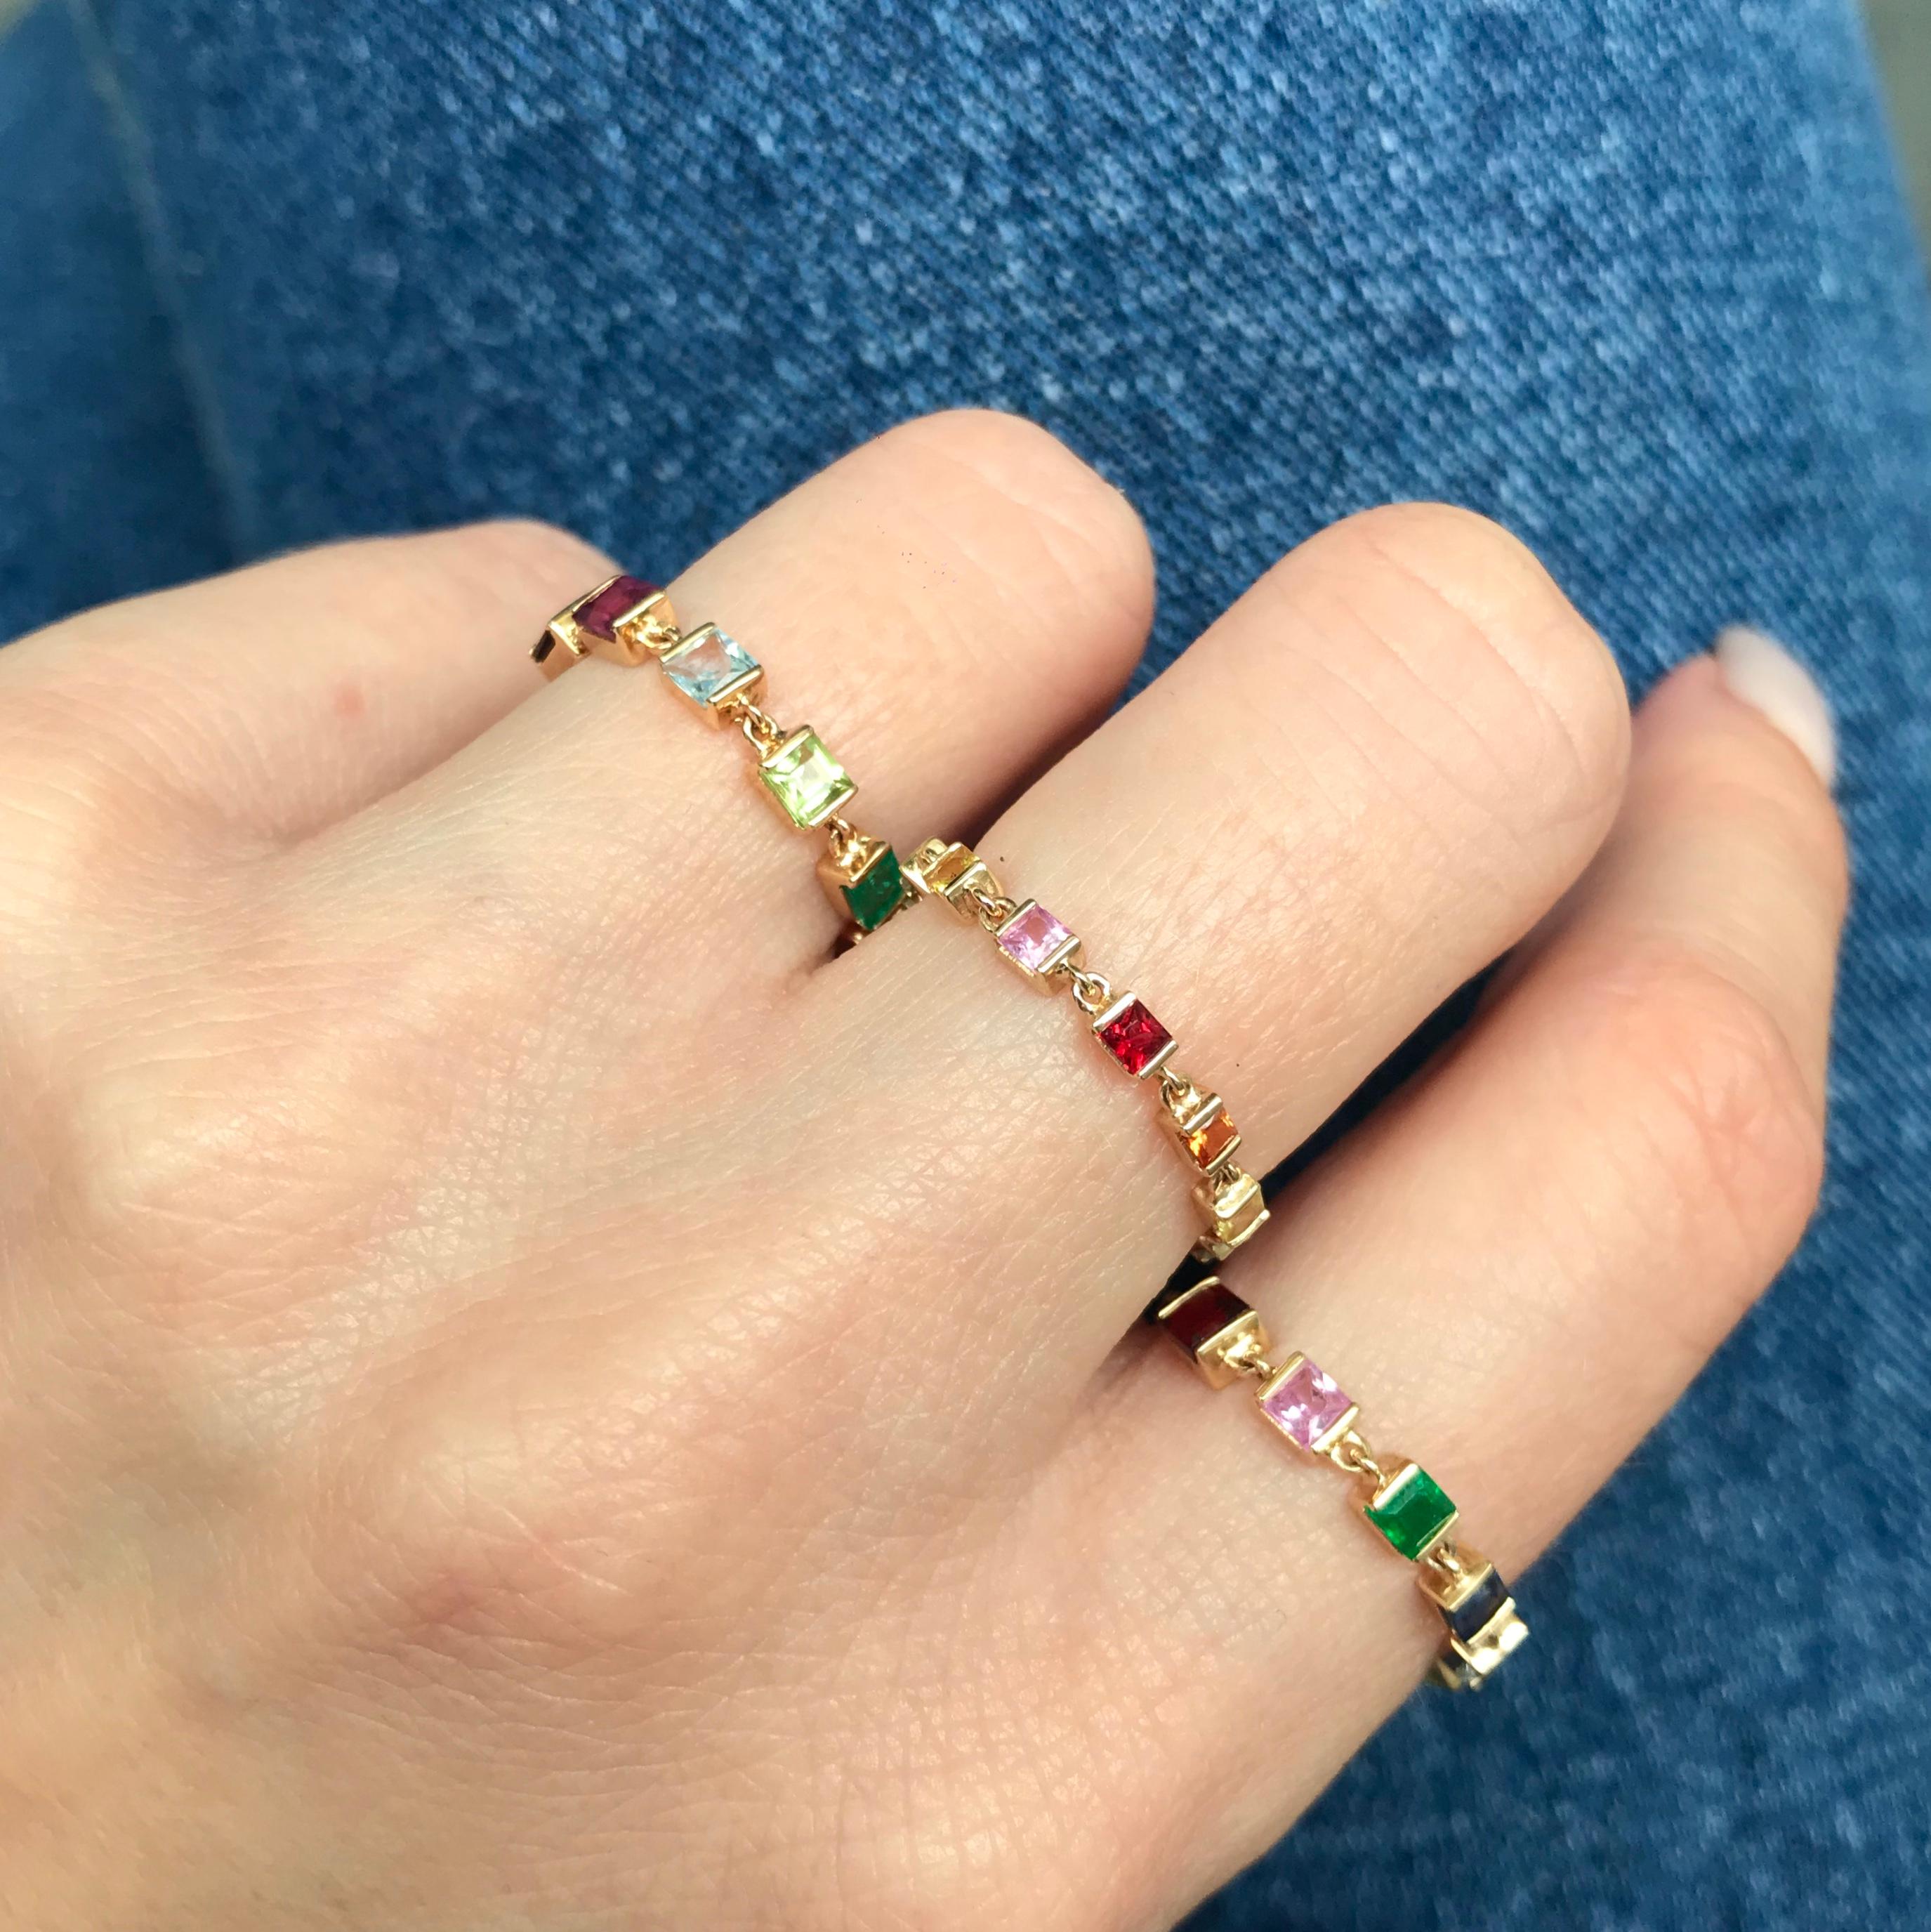 Add some color to your life with our rainbow chain ring. Featuring multicolored gemstones, you will absolutely love this one! It shows the natural allure and effortless luxury of our chain rings. Each setting has been carefully handmade for this